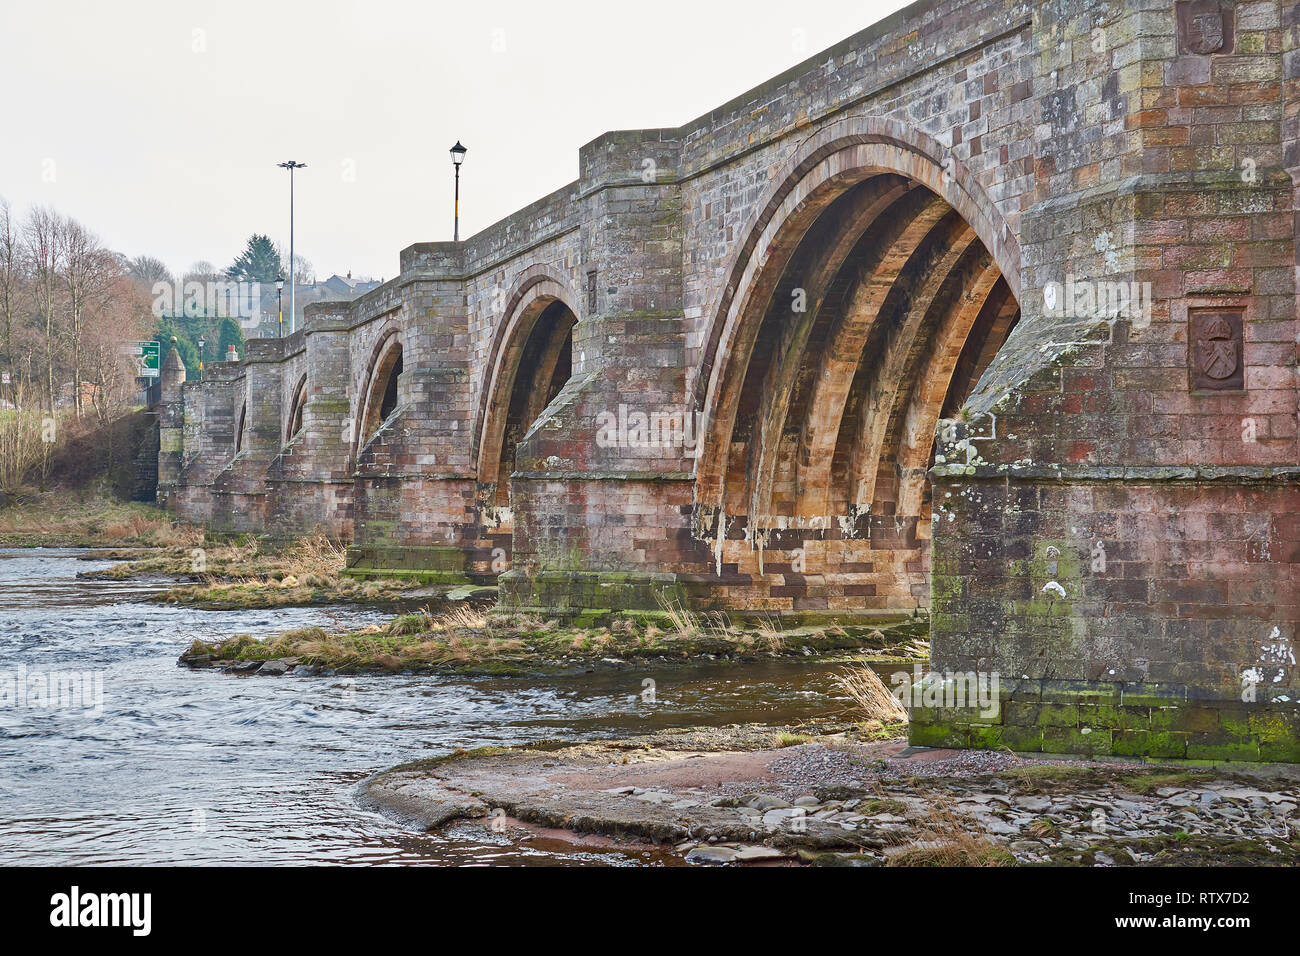 BRIDGE OF DEE A90 ROAD OVER RIVER DEE ABERDEEN SCOTLAND THE ARCHES OF THE OLD BRIDGE Stock Photo